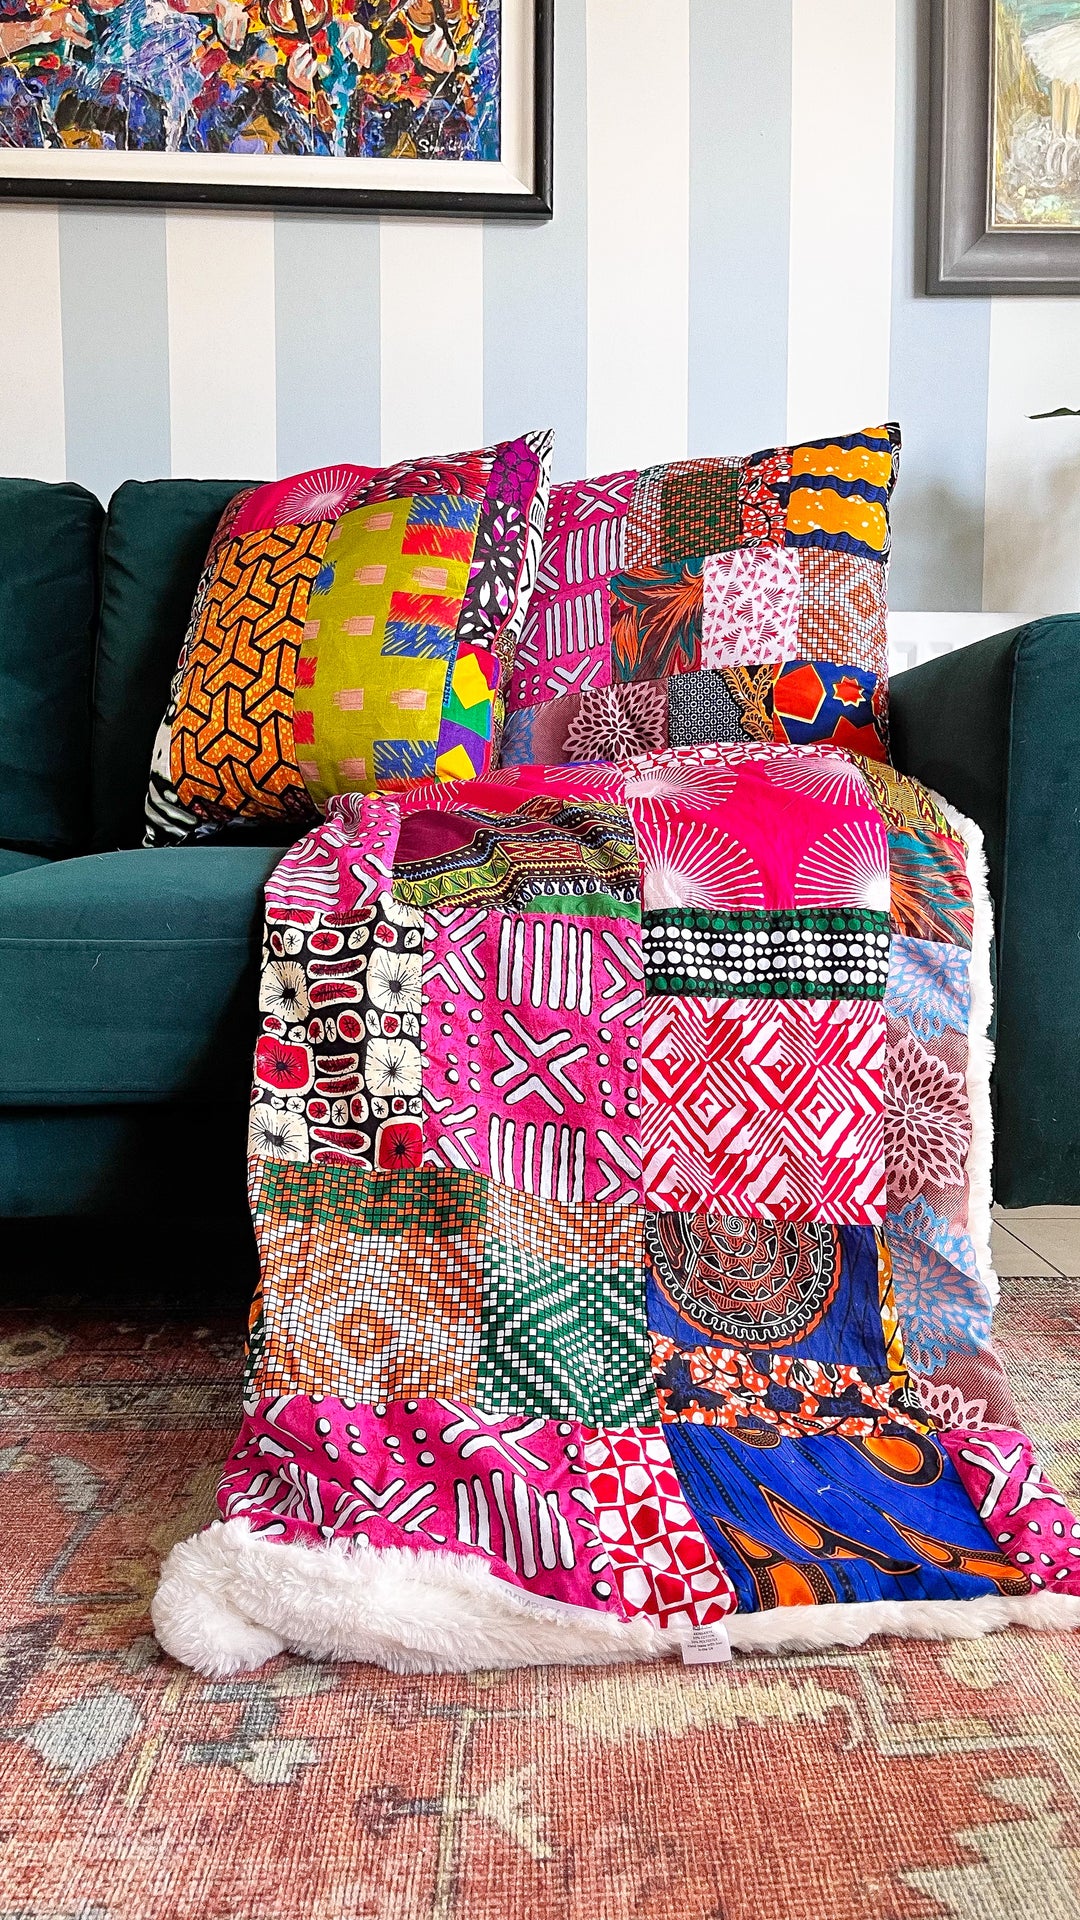 Large Handcrafted Patchwork Blanket + Cushion + Get The Second FREE